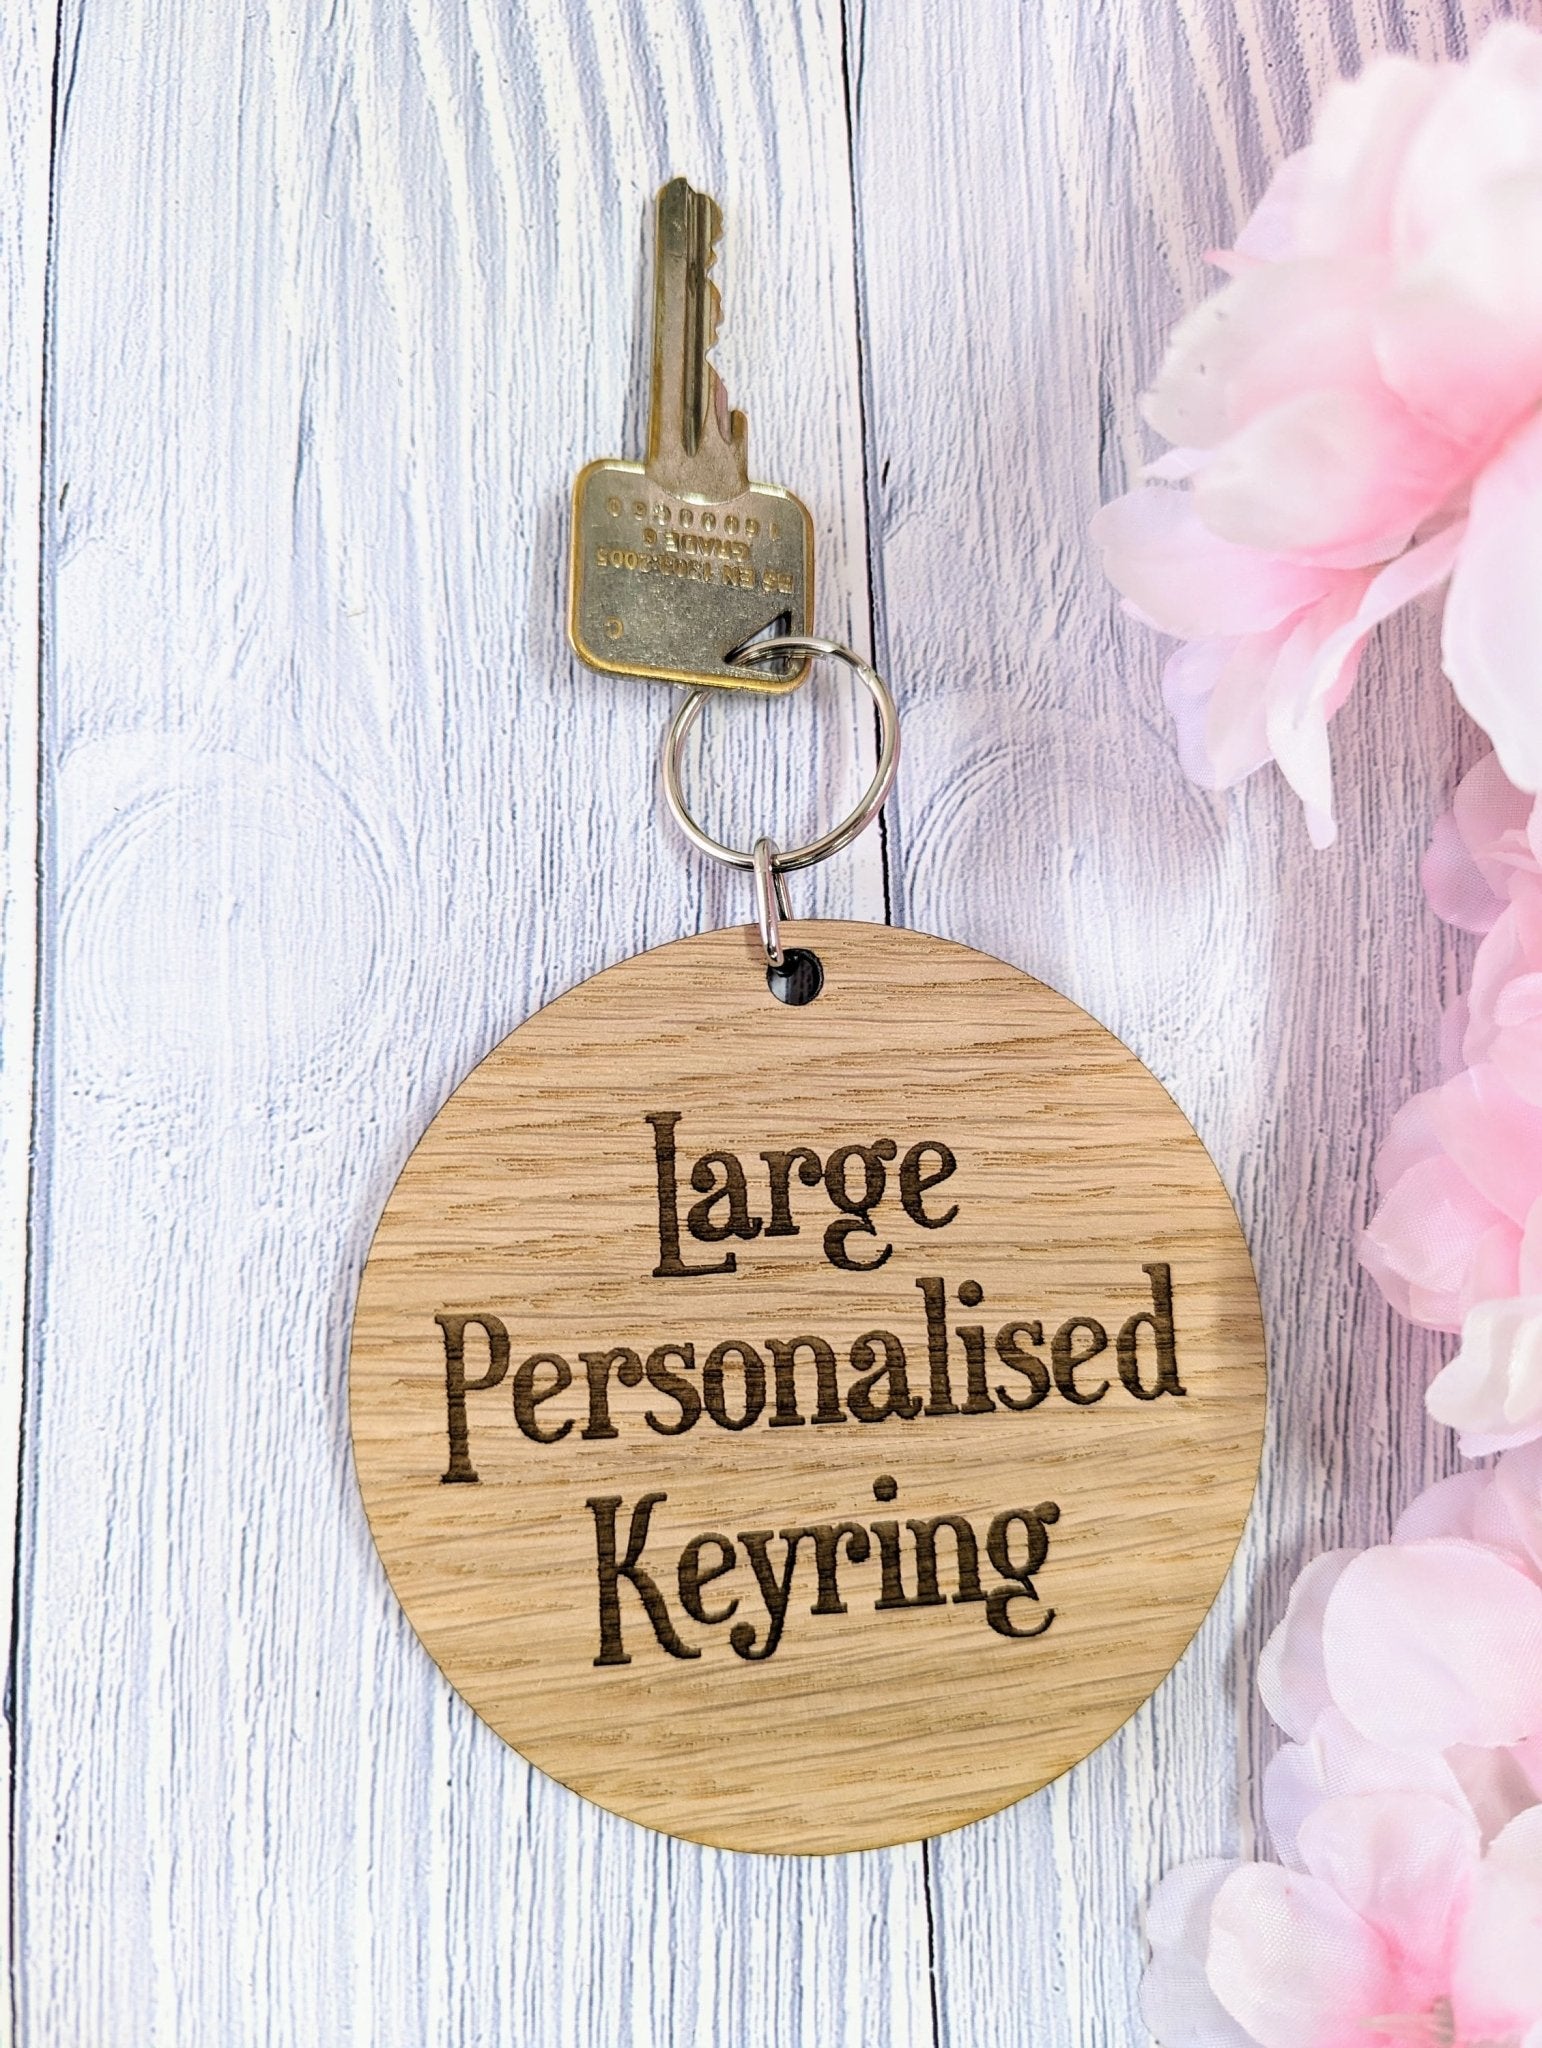 Personalised 90mm Diameter Round Wooden Keyring - Custom Engraved Text - Ideal for Special Occasions or Unique Gifts - CherryGroveCraft